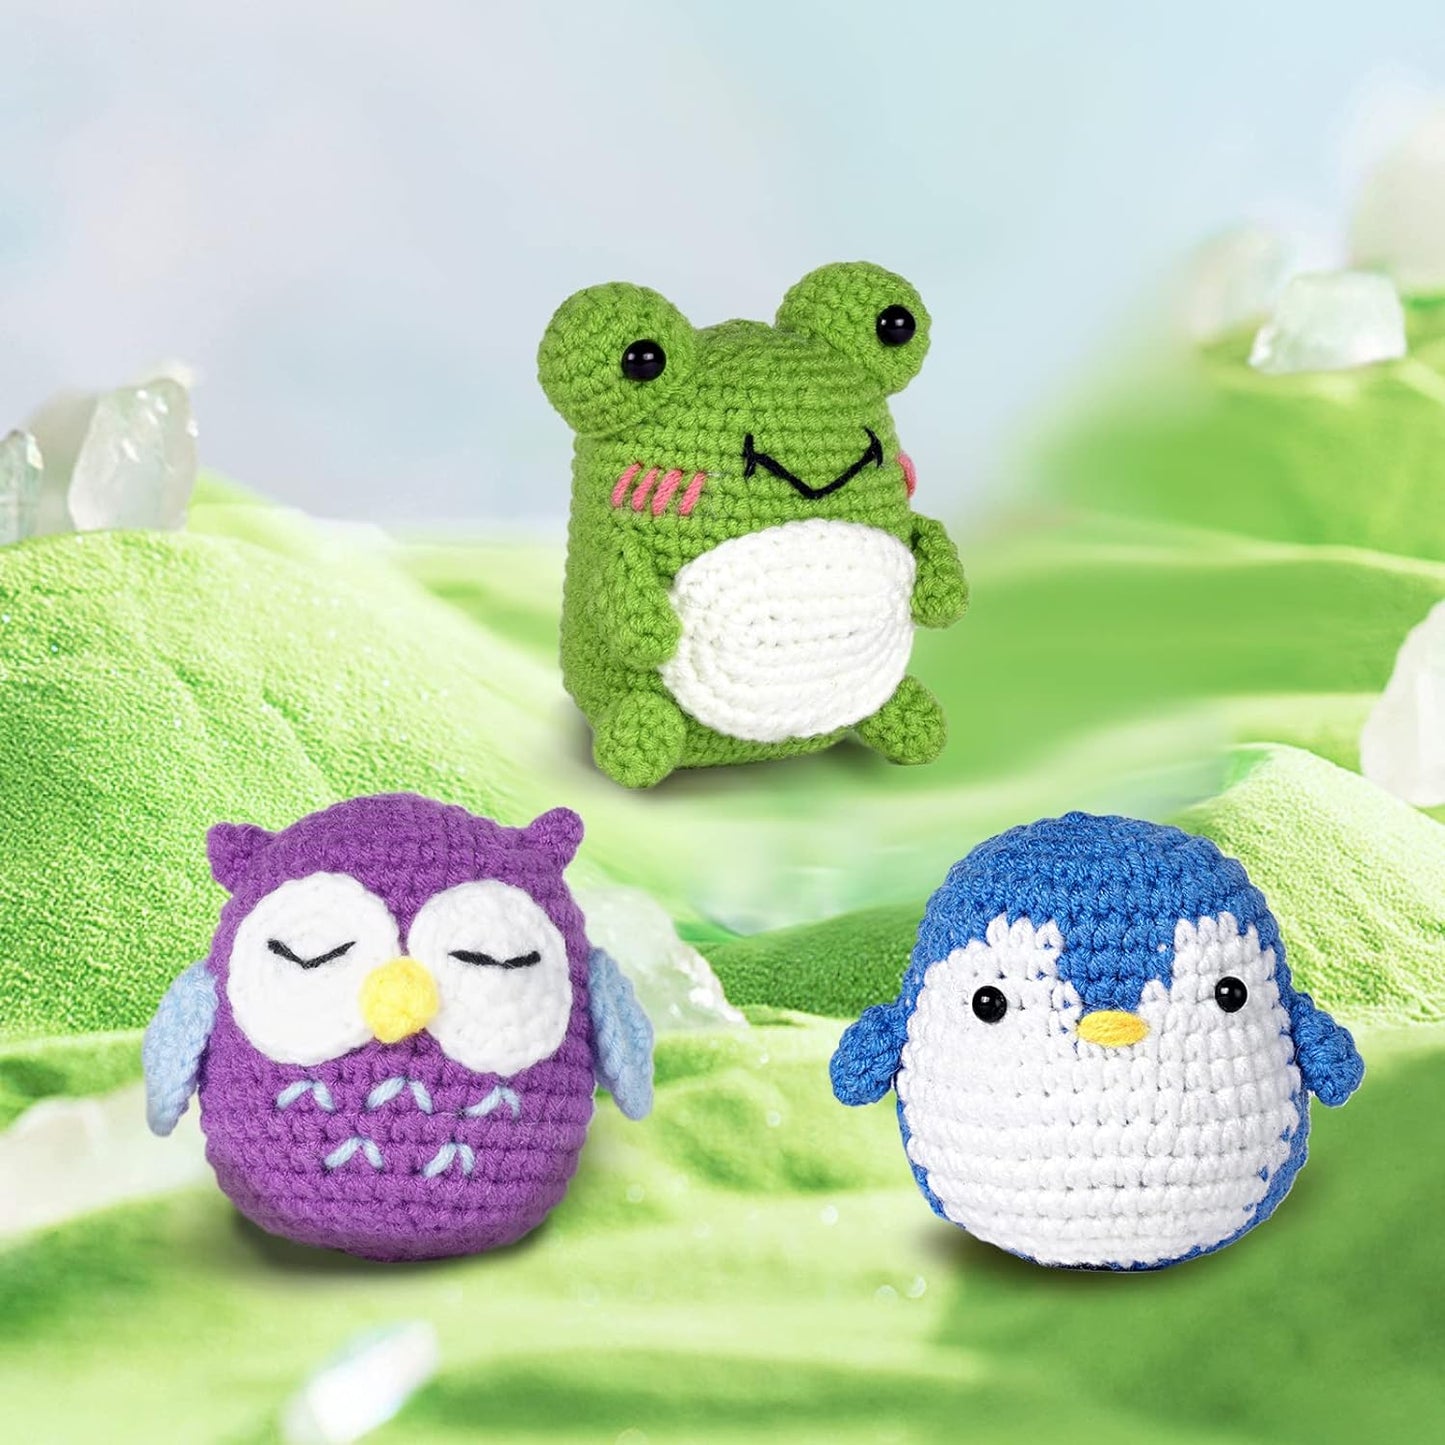 Crochet Kit for Beginners, 3 Pattern Animals-Owl, Penguin, Frog, Knitting Kit for Adult Kids with Step-By-Step Video Tutorials and Yarns, Hook, Accessories